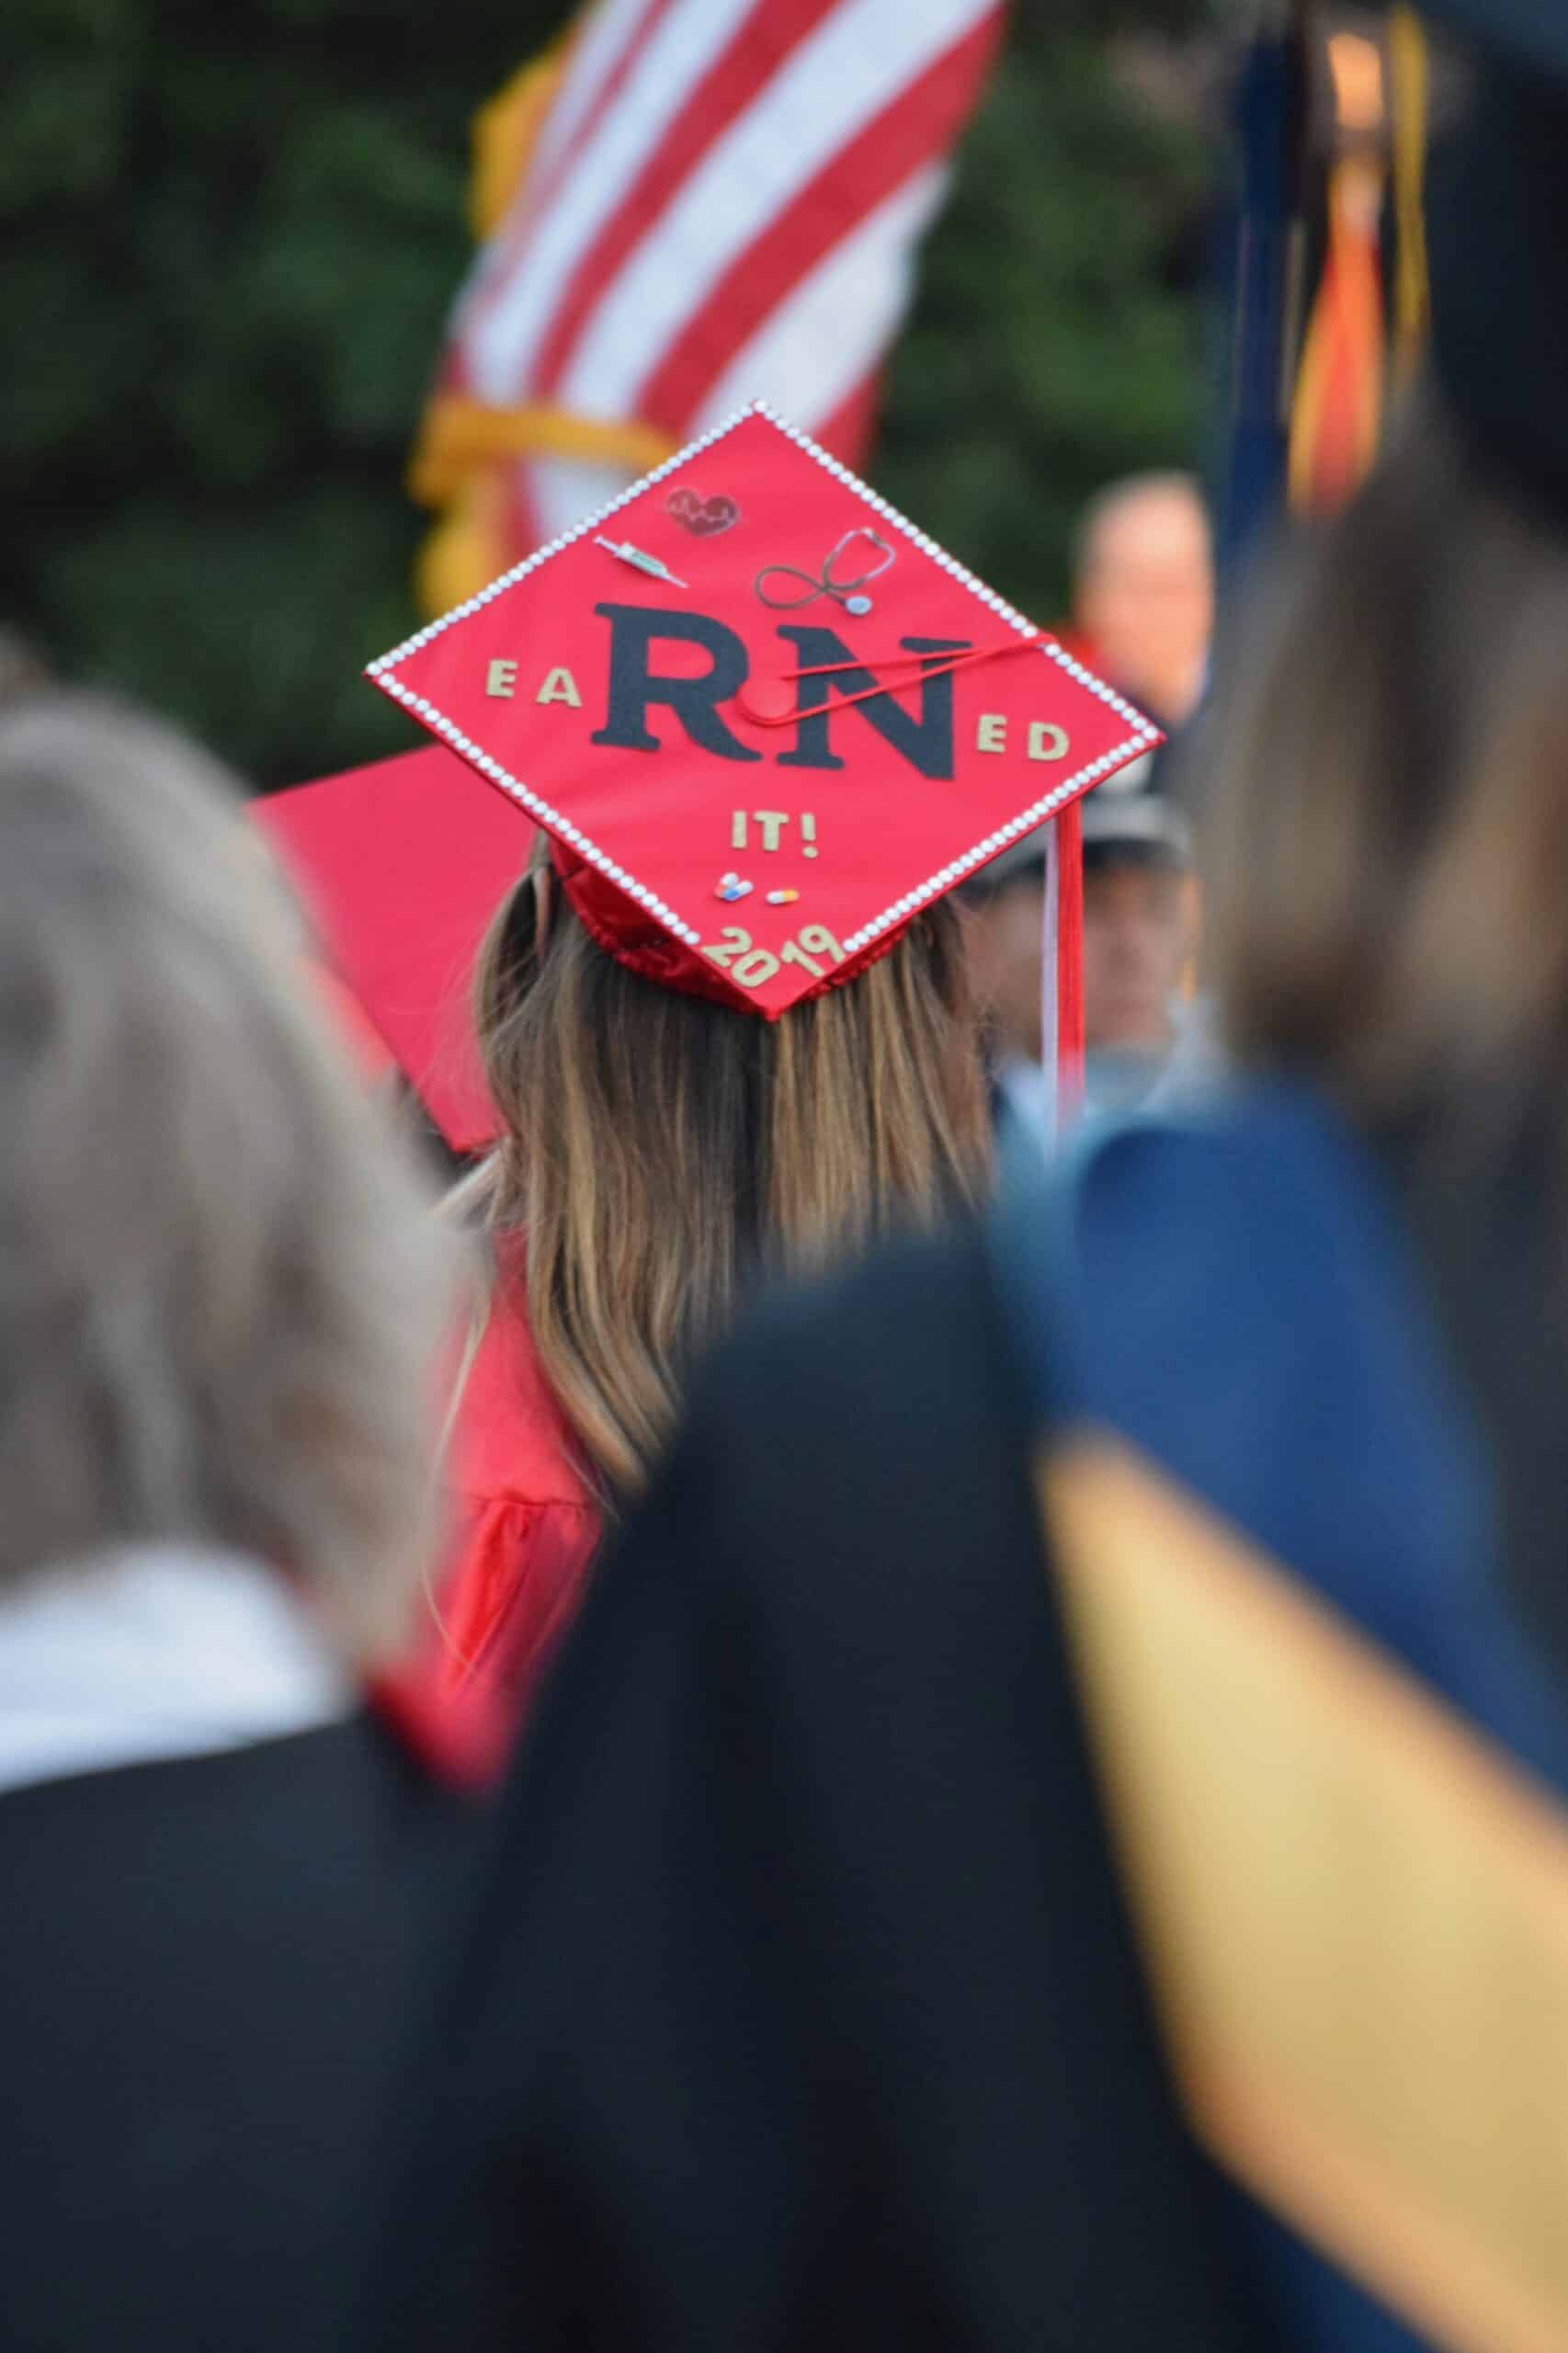 70 Creative Graduation Cap Ideas That Stand Out From the Crowd